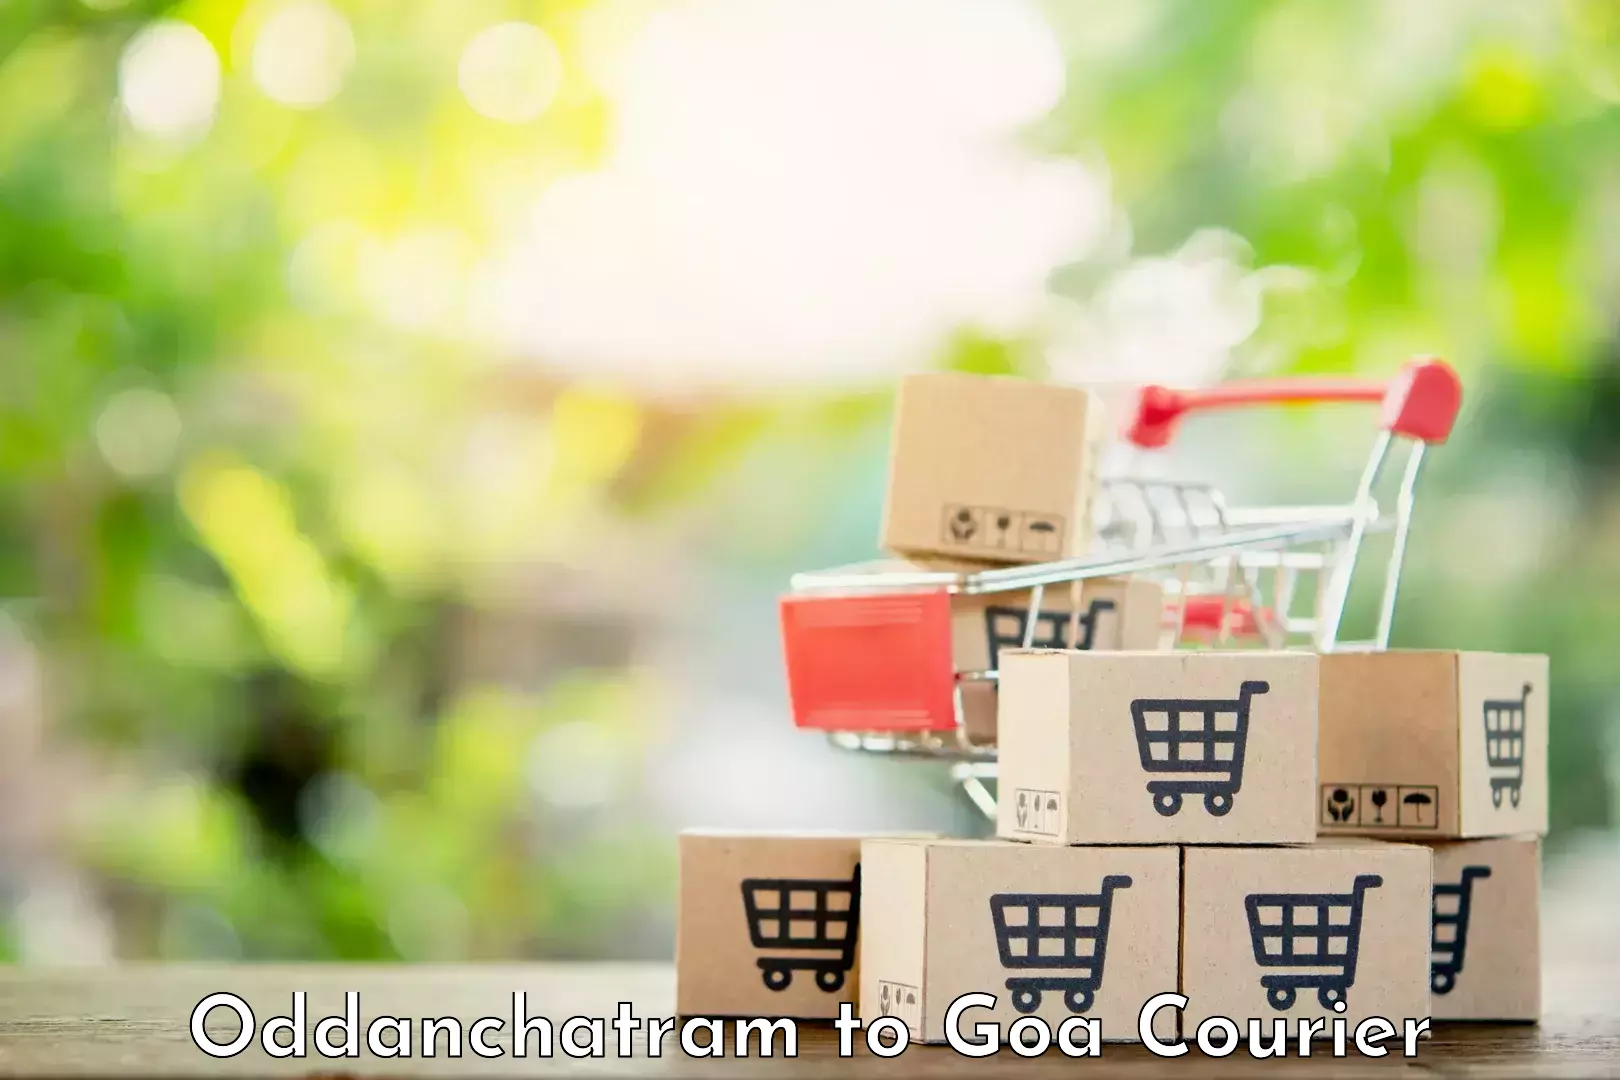 Subscription-based courier Oddanchatram to South Goa